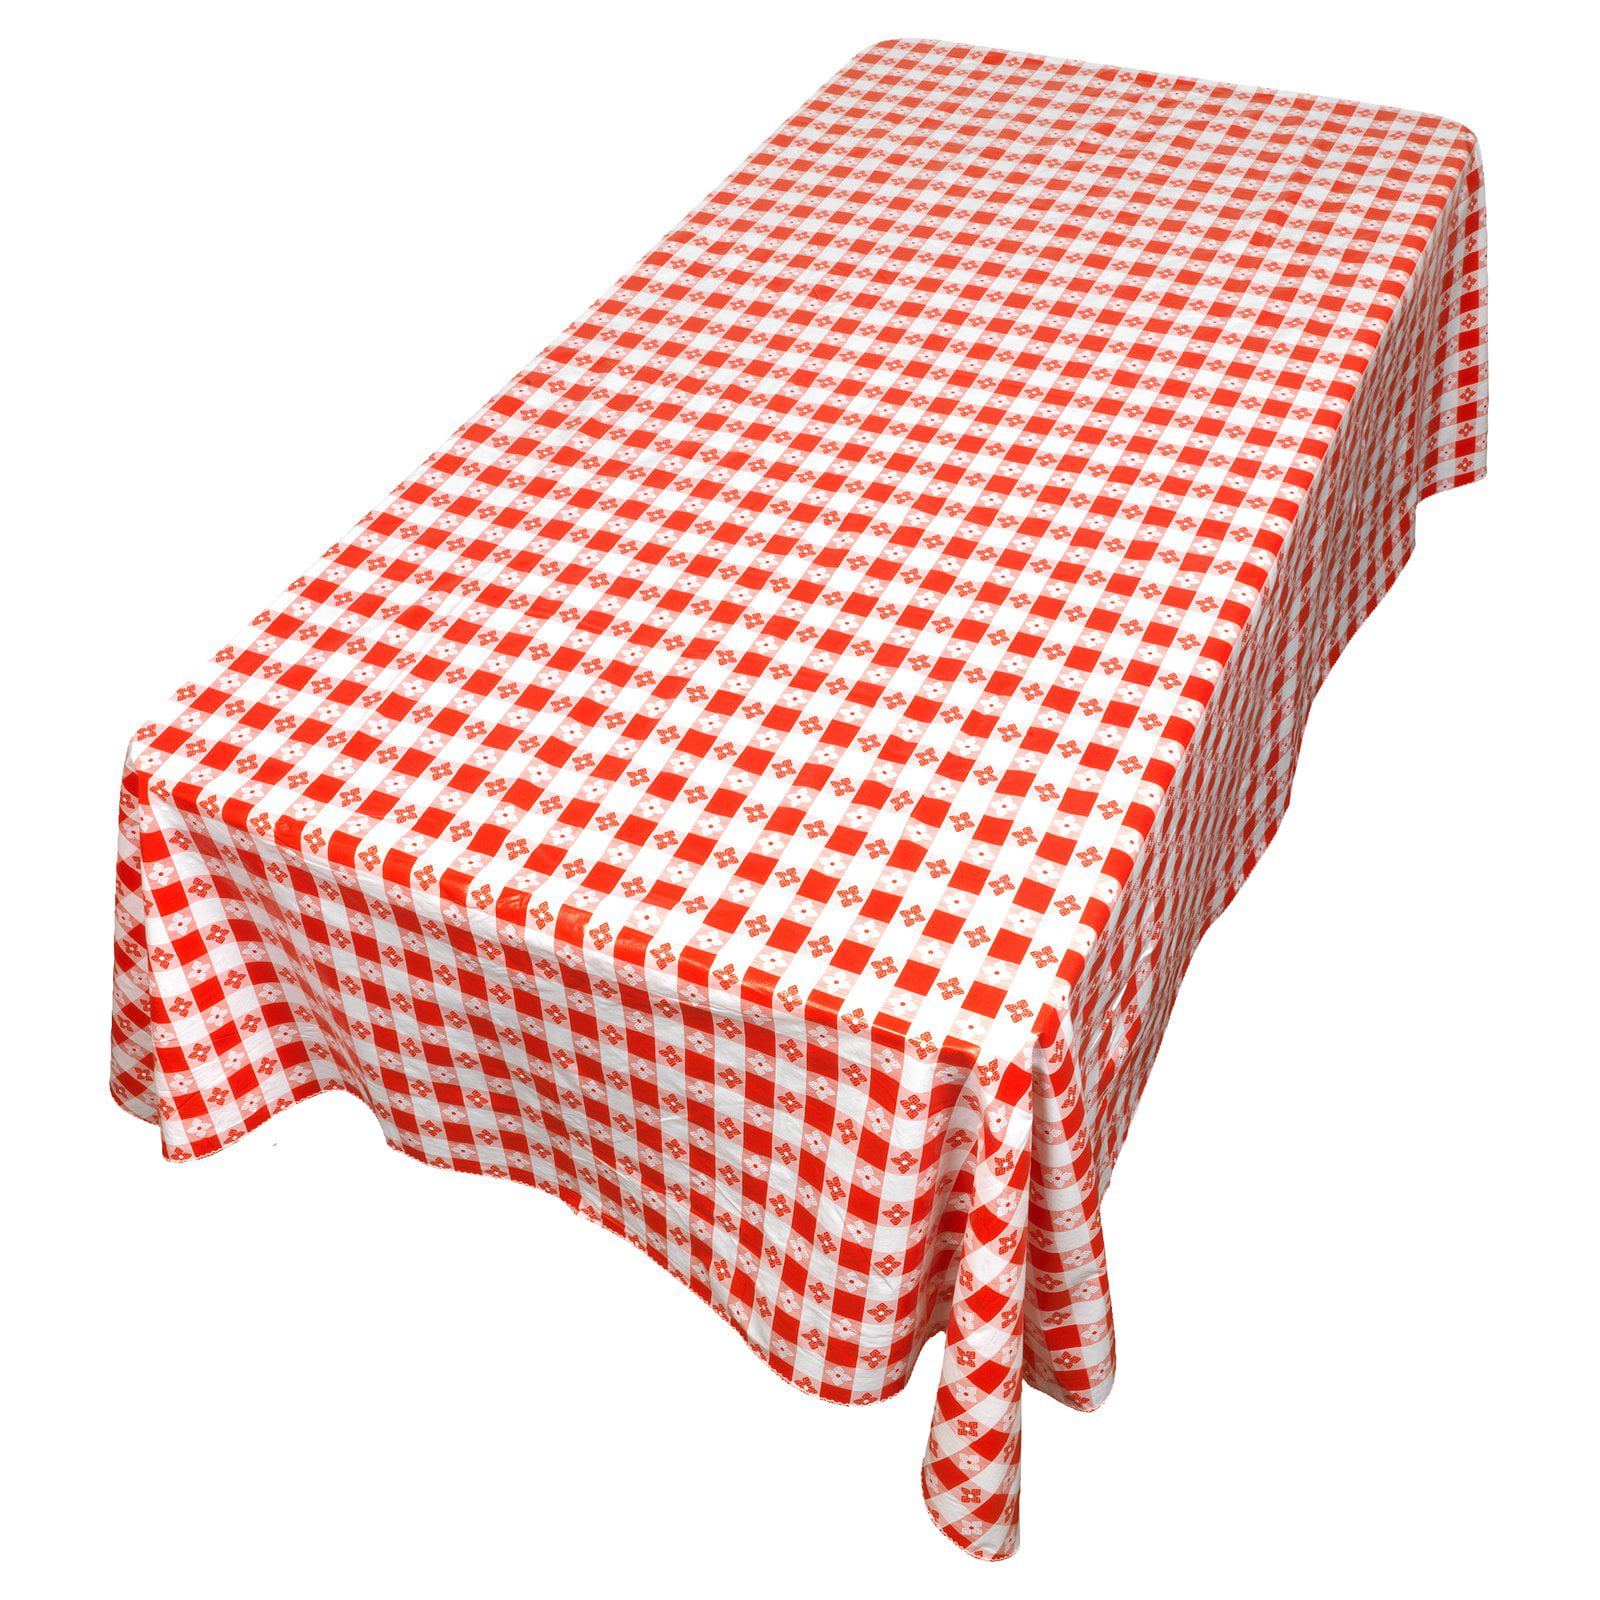 Flannel Backed Tablecloth Picnic BBQ Grill multi-color 52x70 Oblong Vinyl